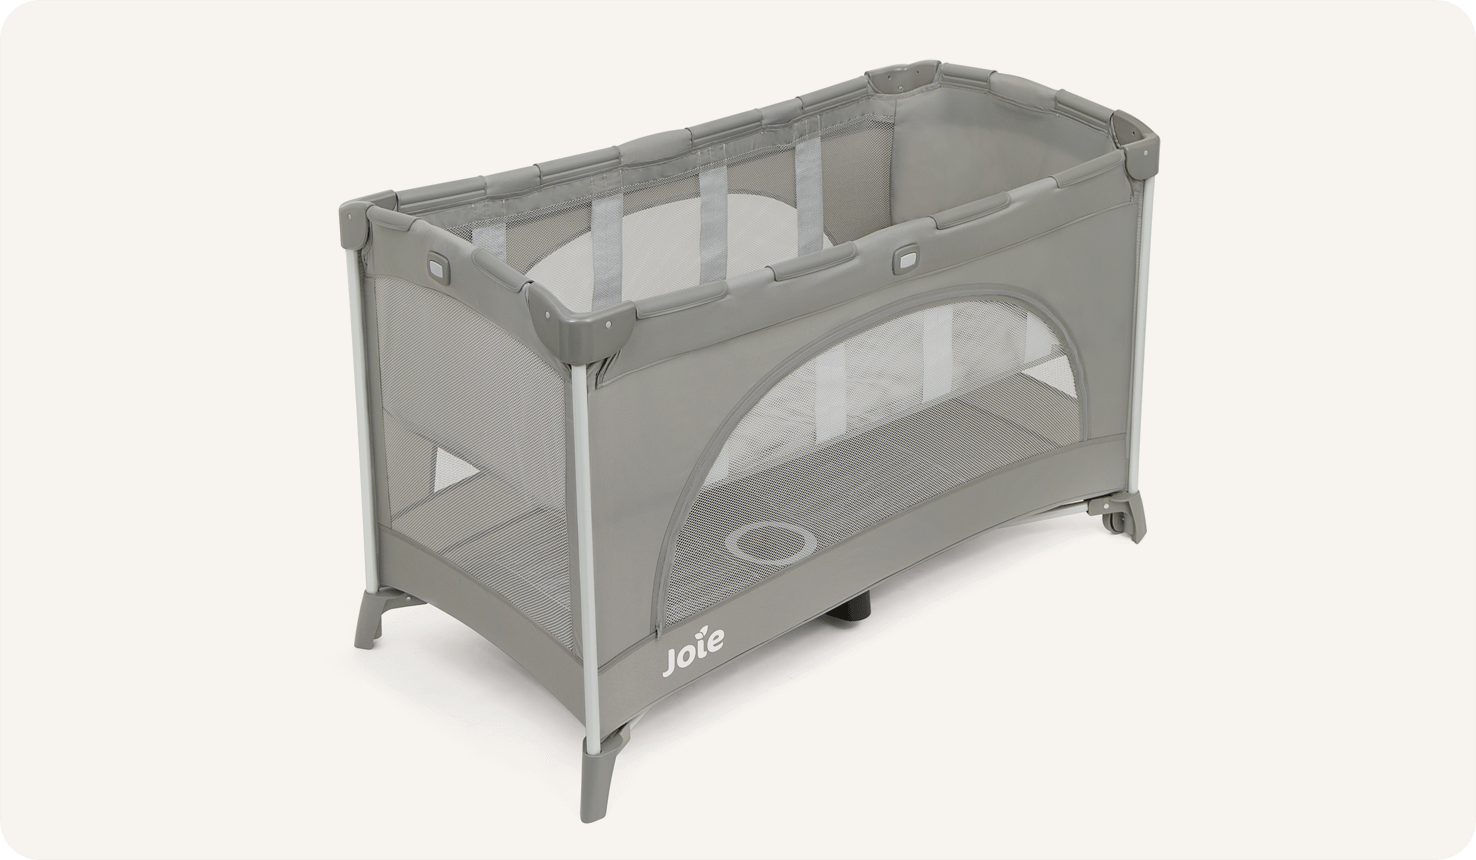 The Joie travel cot allura in grey, pink, and flower patterns on a right angle.